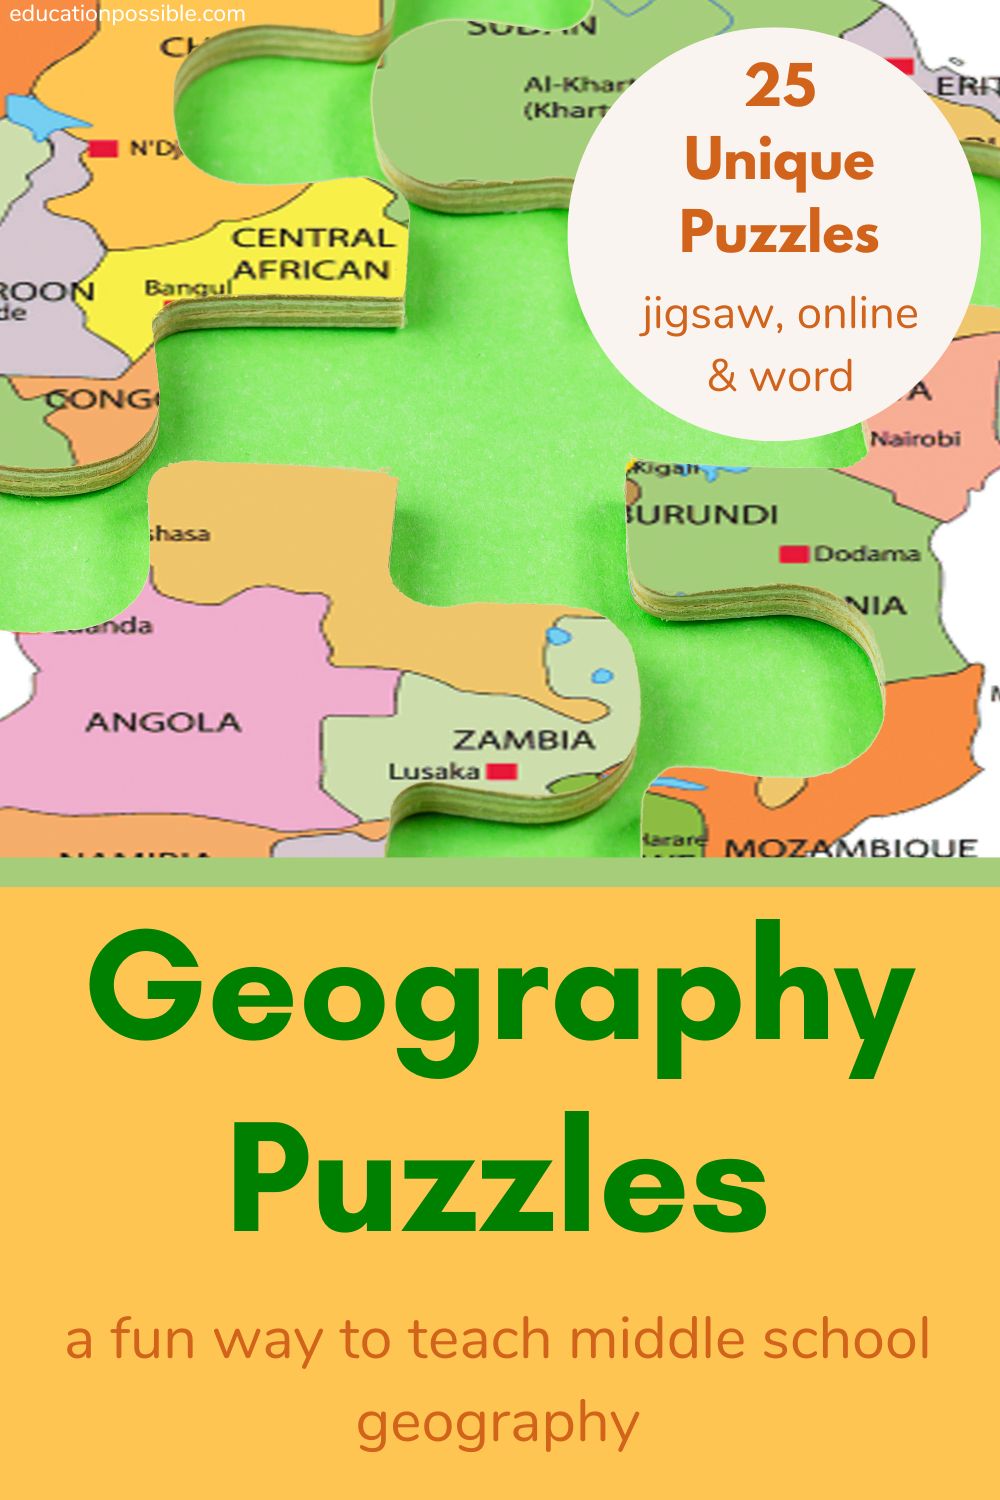 4 pieces of a African map jigsaw puzzle lined up to put together, sitting on a lime green background